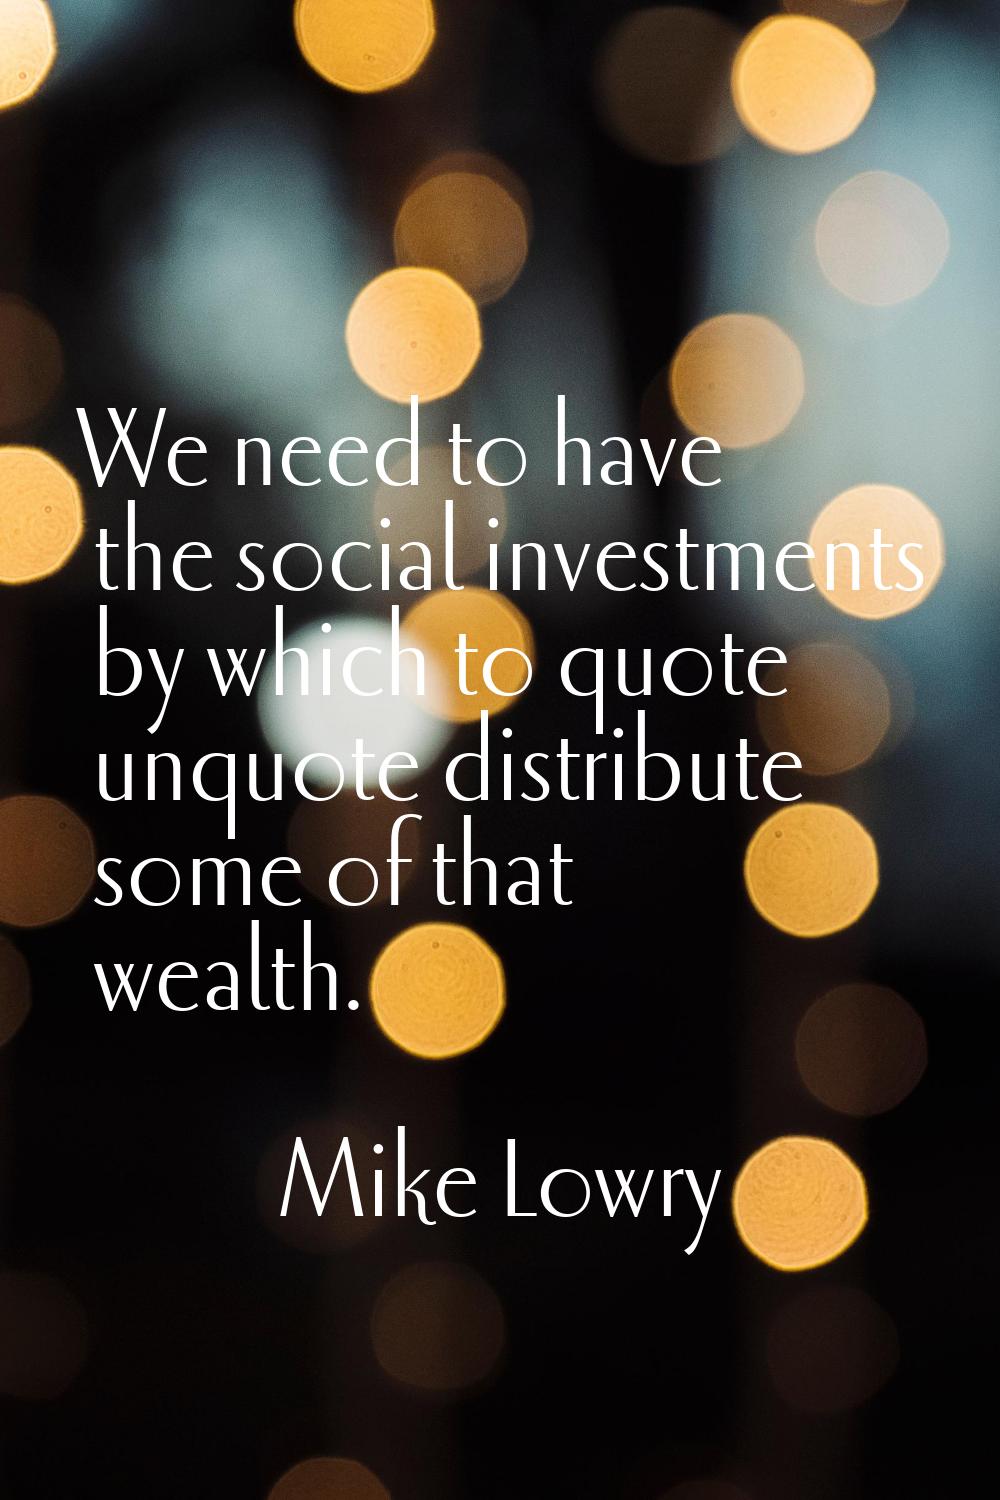 We need to have the social investments by which to quote unquote distribute some of that wealth.